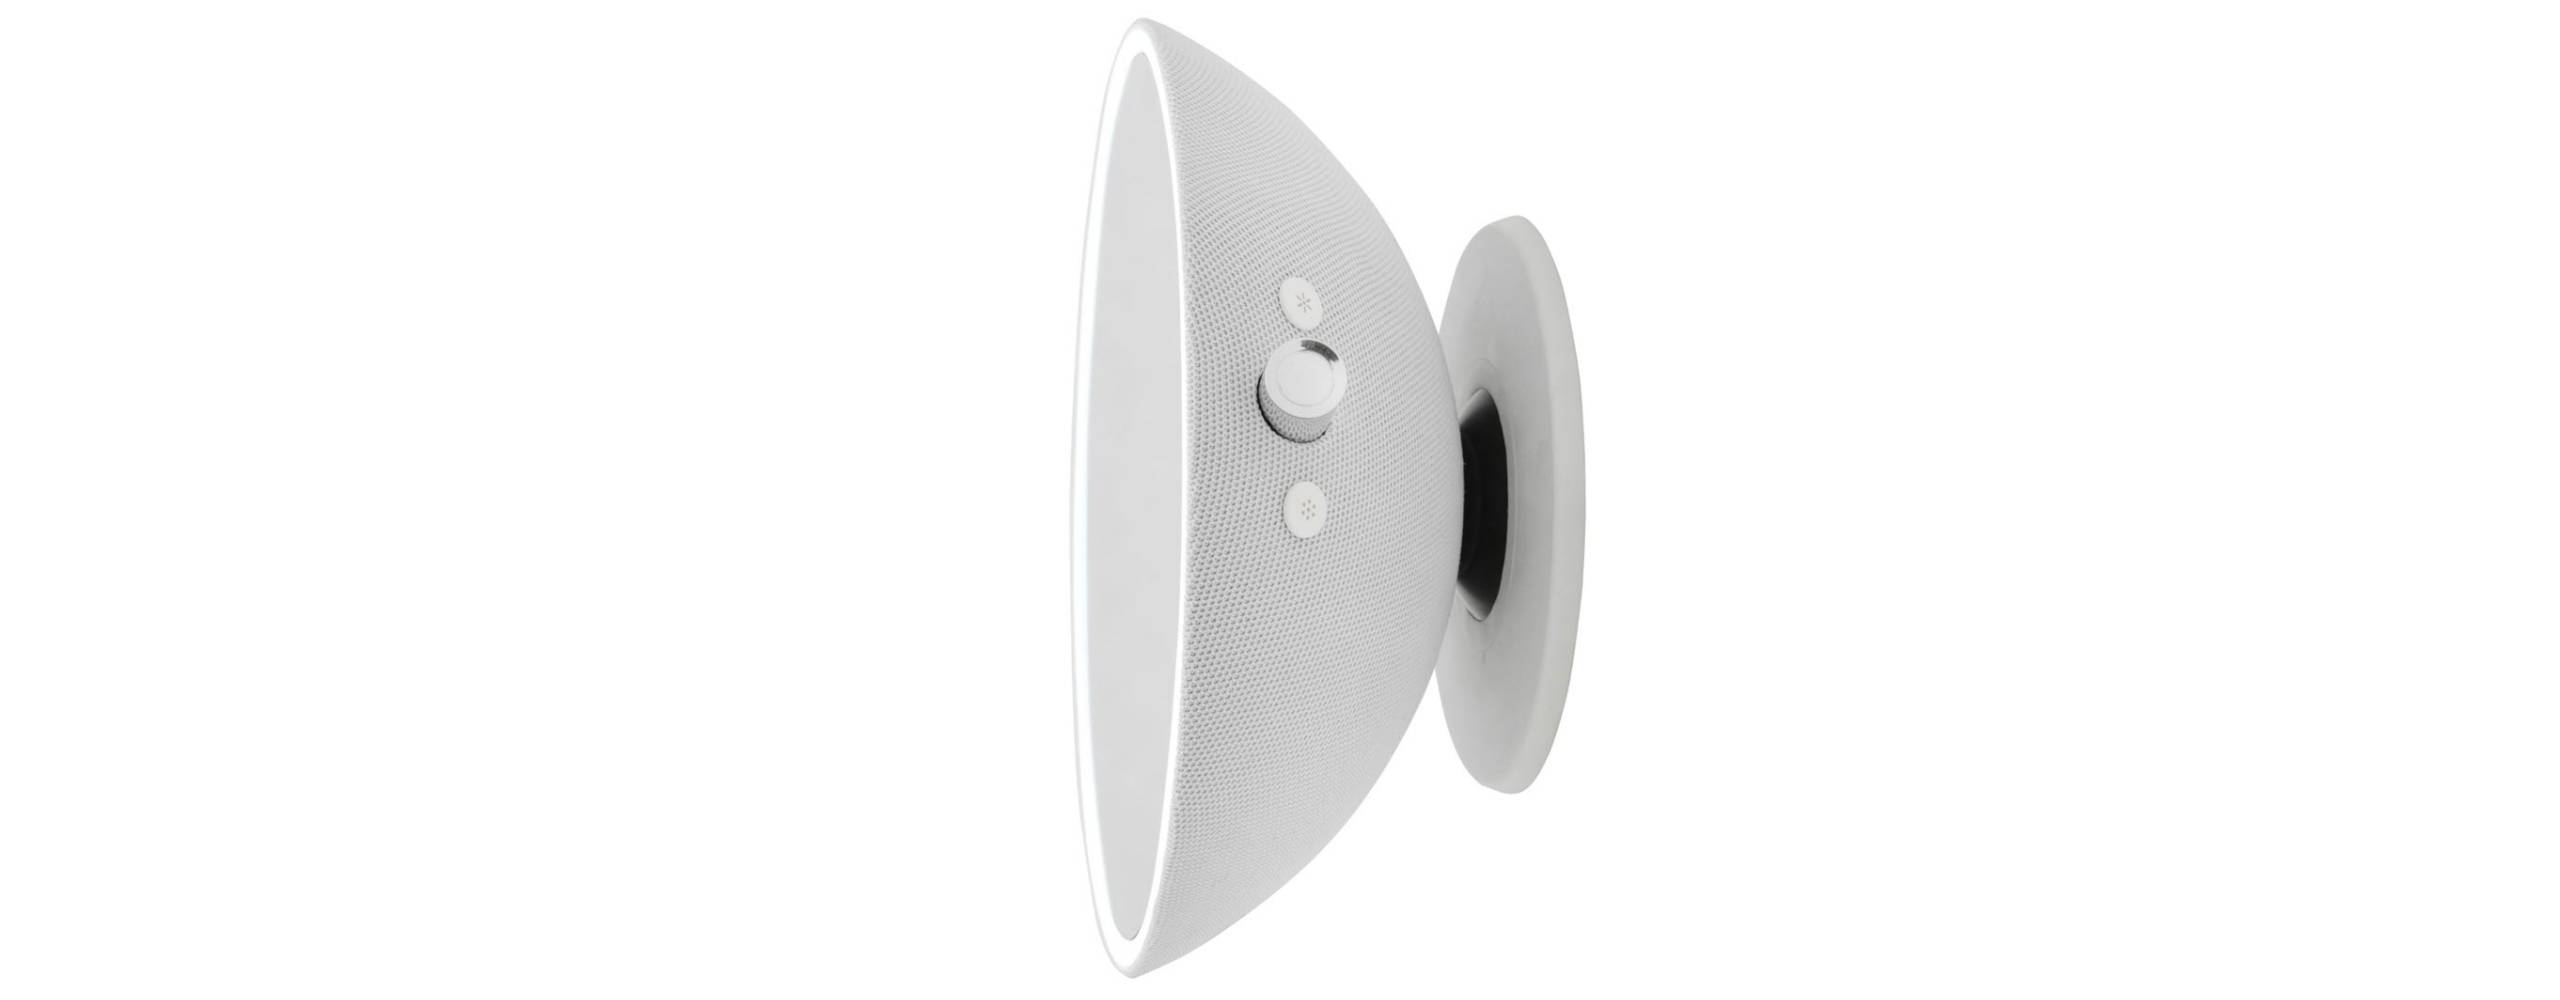 A rendering of the Sharper image fogless mirror. This is a side view showing off the half spherical mirror attached to a magnetic base and three buttons the device has.